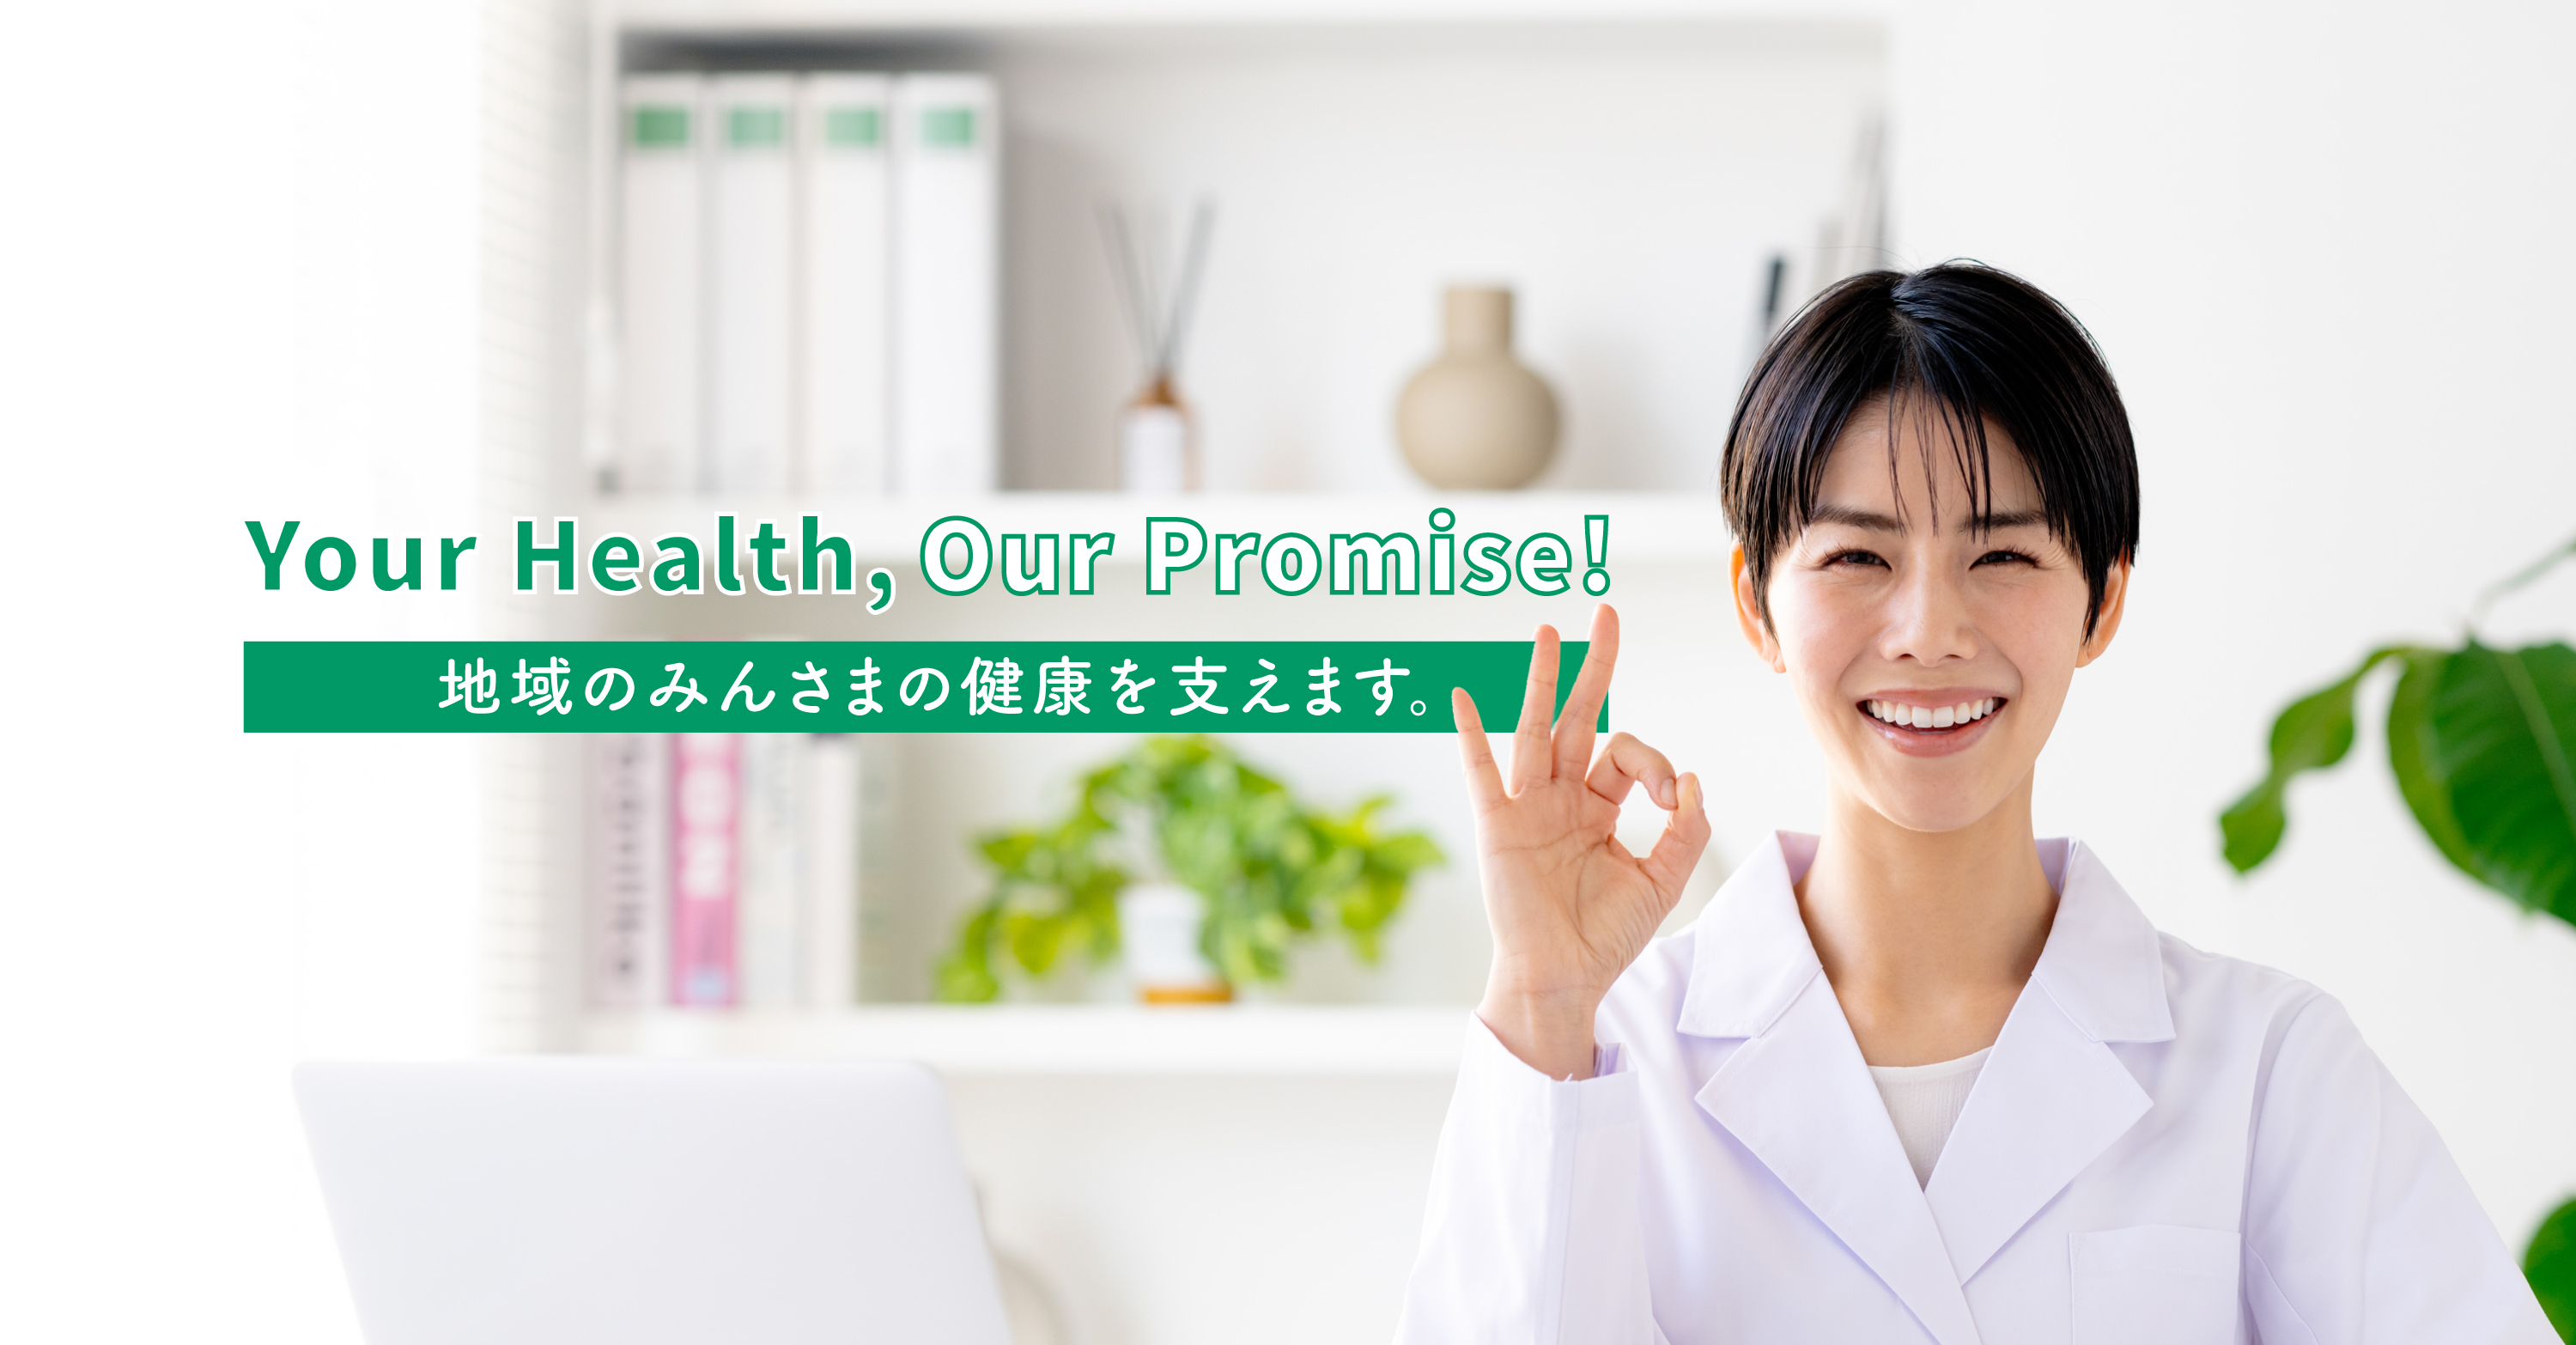 Your Health, Our Promise”！地域の皆様の健康を支えます！